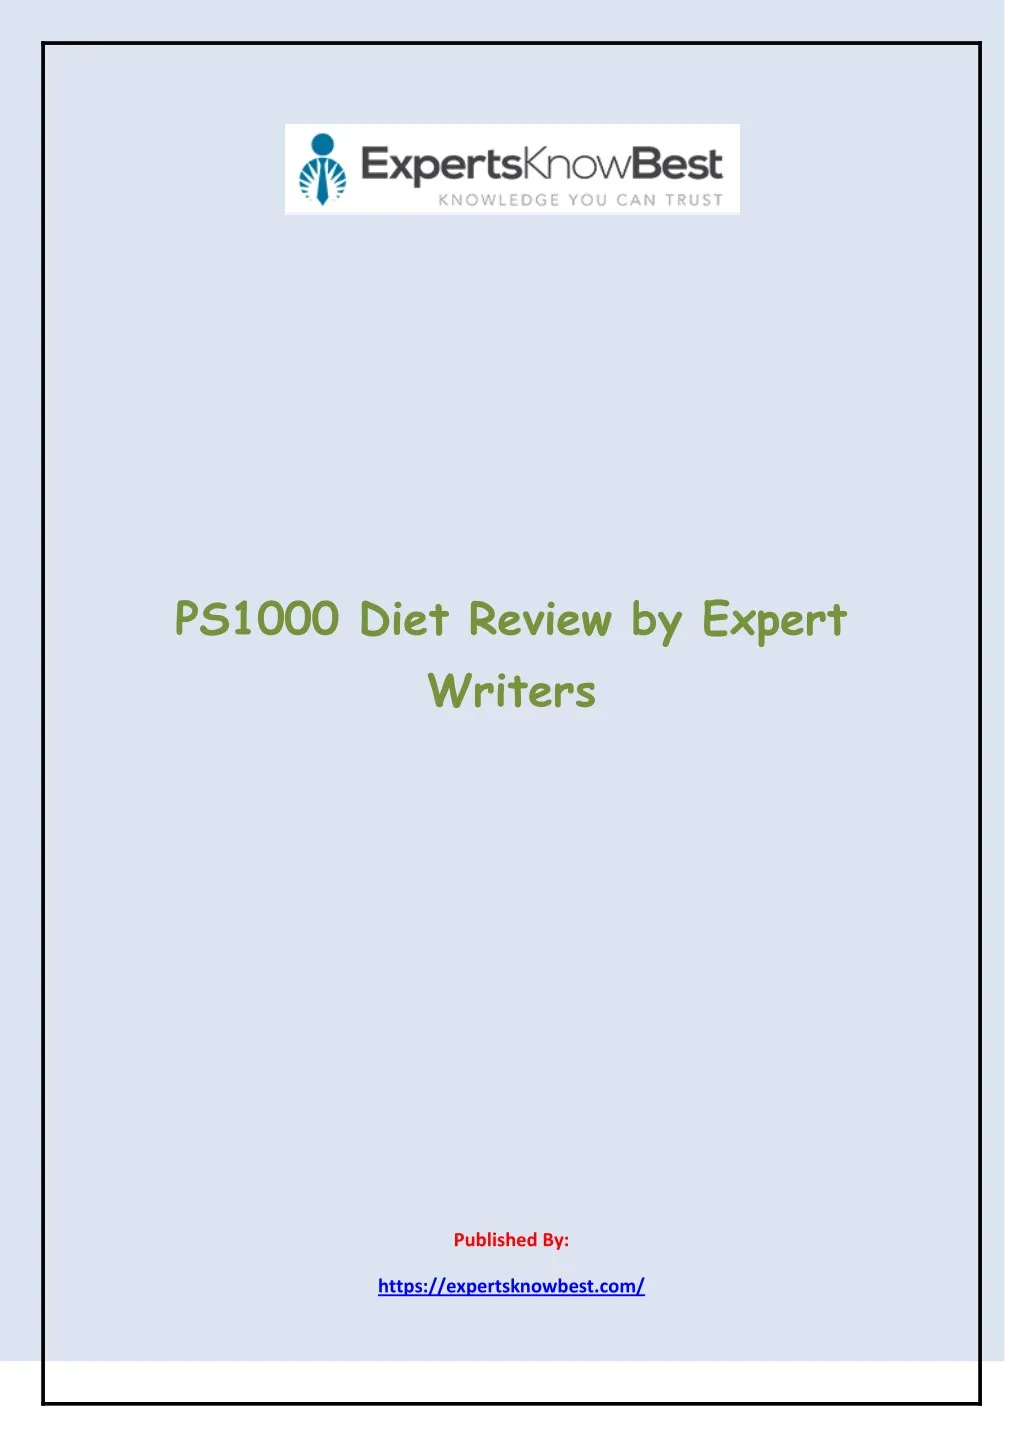 ps1000 diet review by expert writers